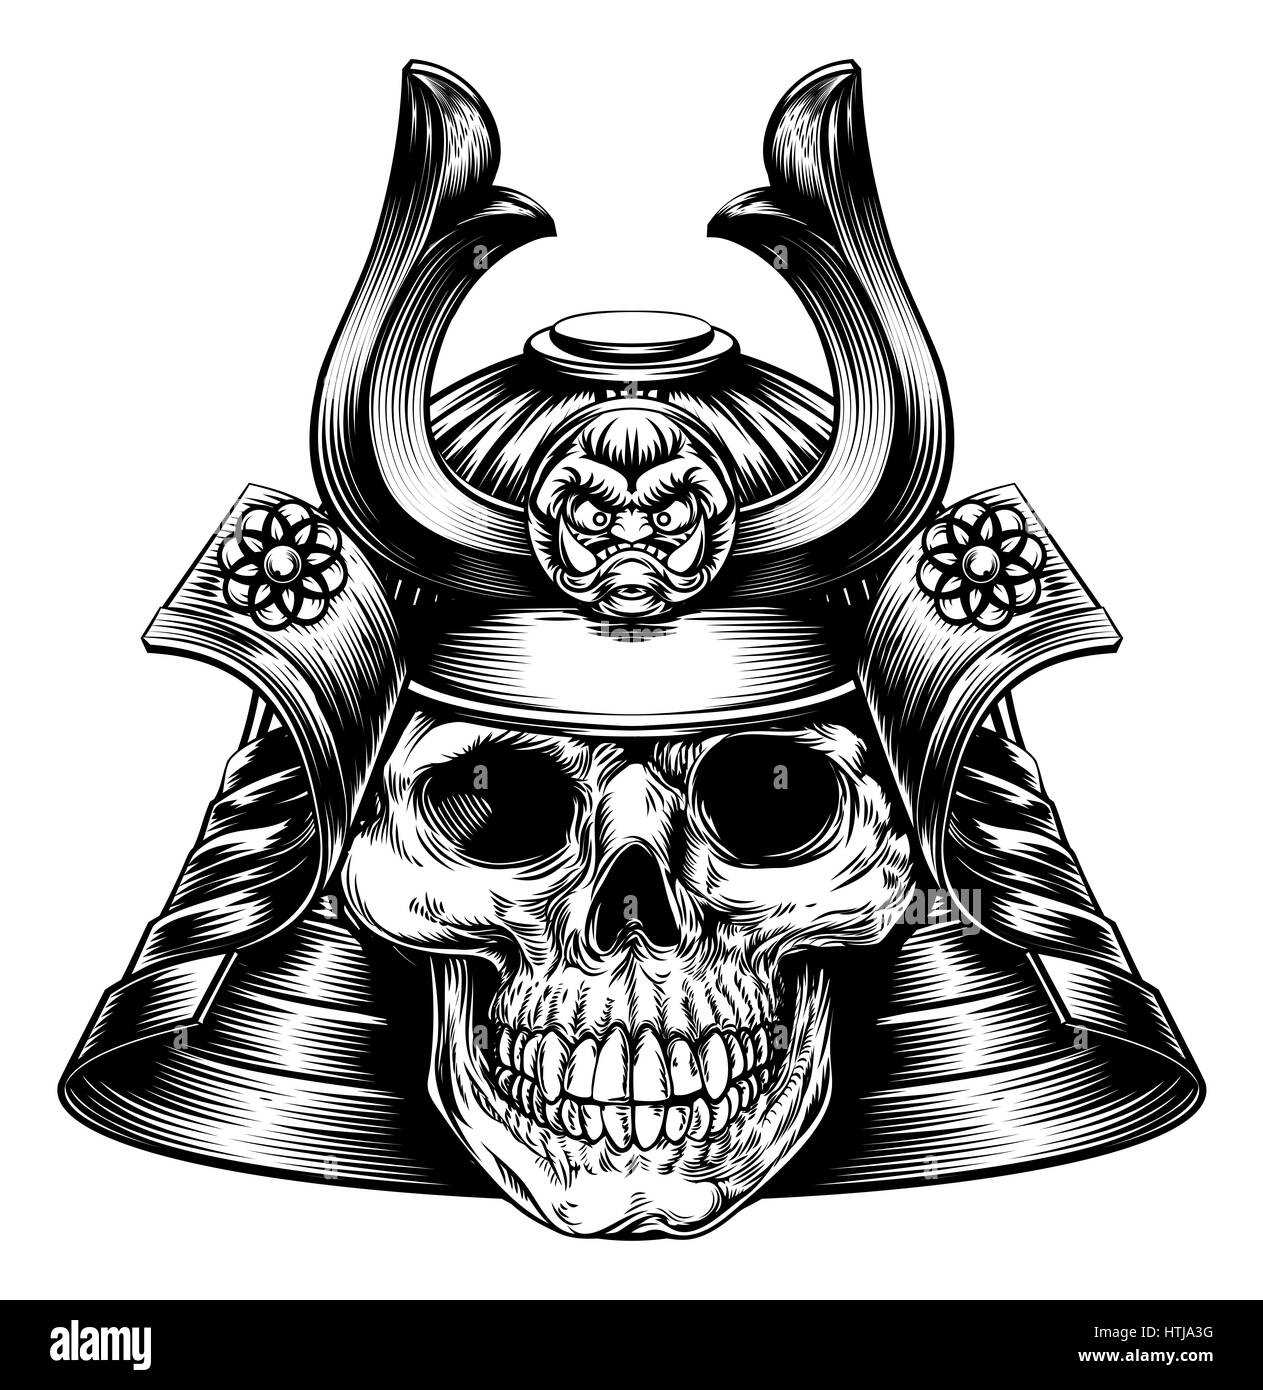 A samurai mask and helmet with a skeletal skull face Stock Photo